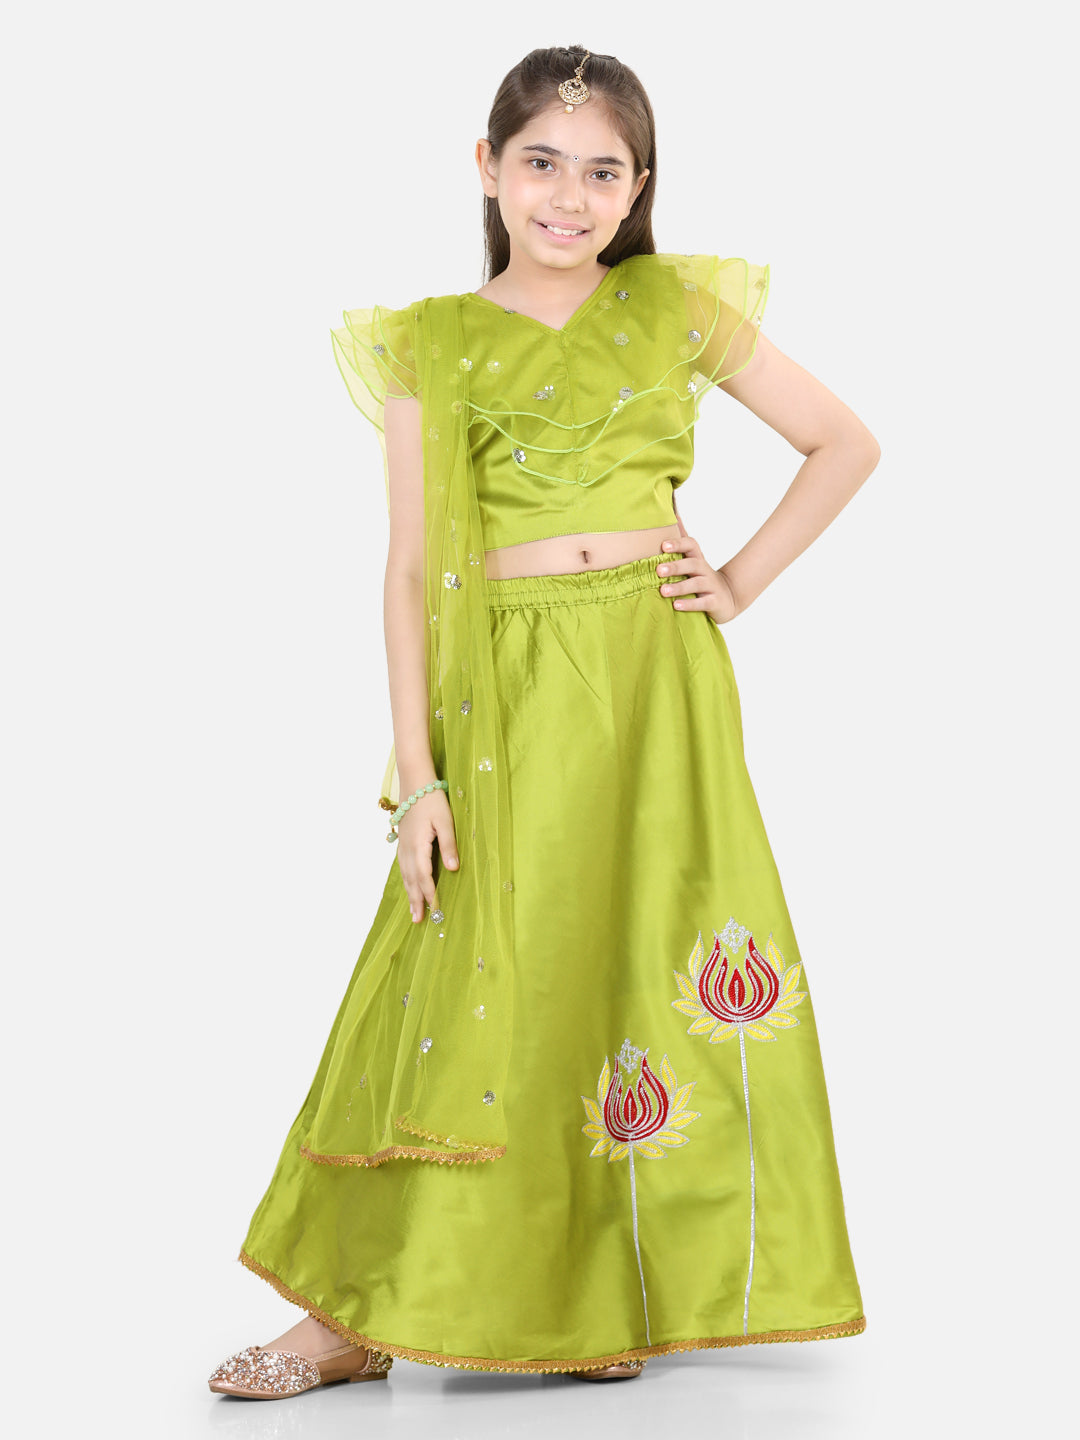 BownBee Lotus Embroidery Lehenga with Ruffle Sequin Top- Green